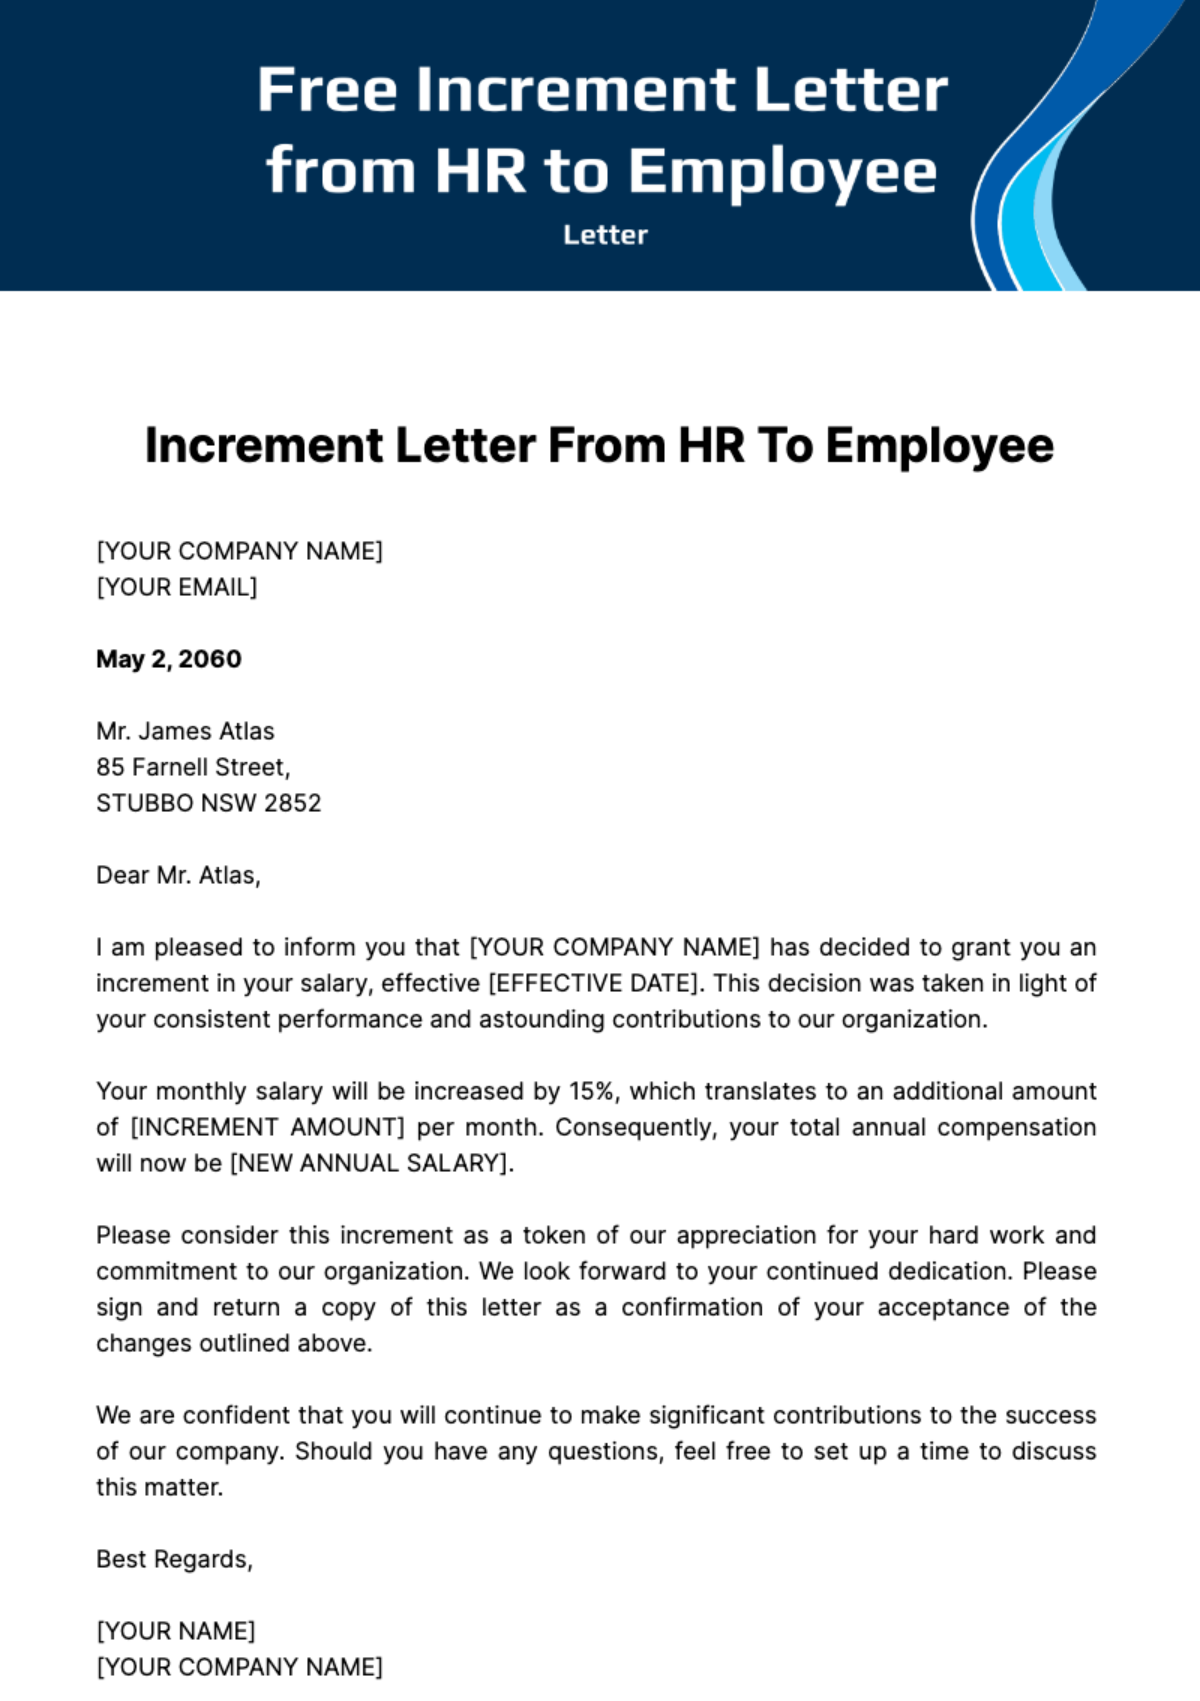 Free Increment Letter from HR to Employee Template